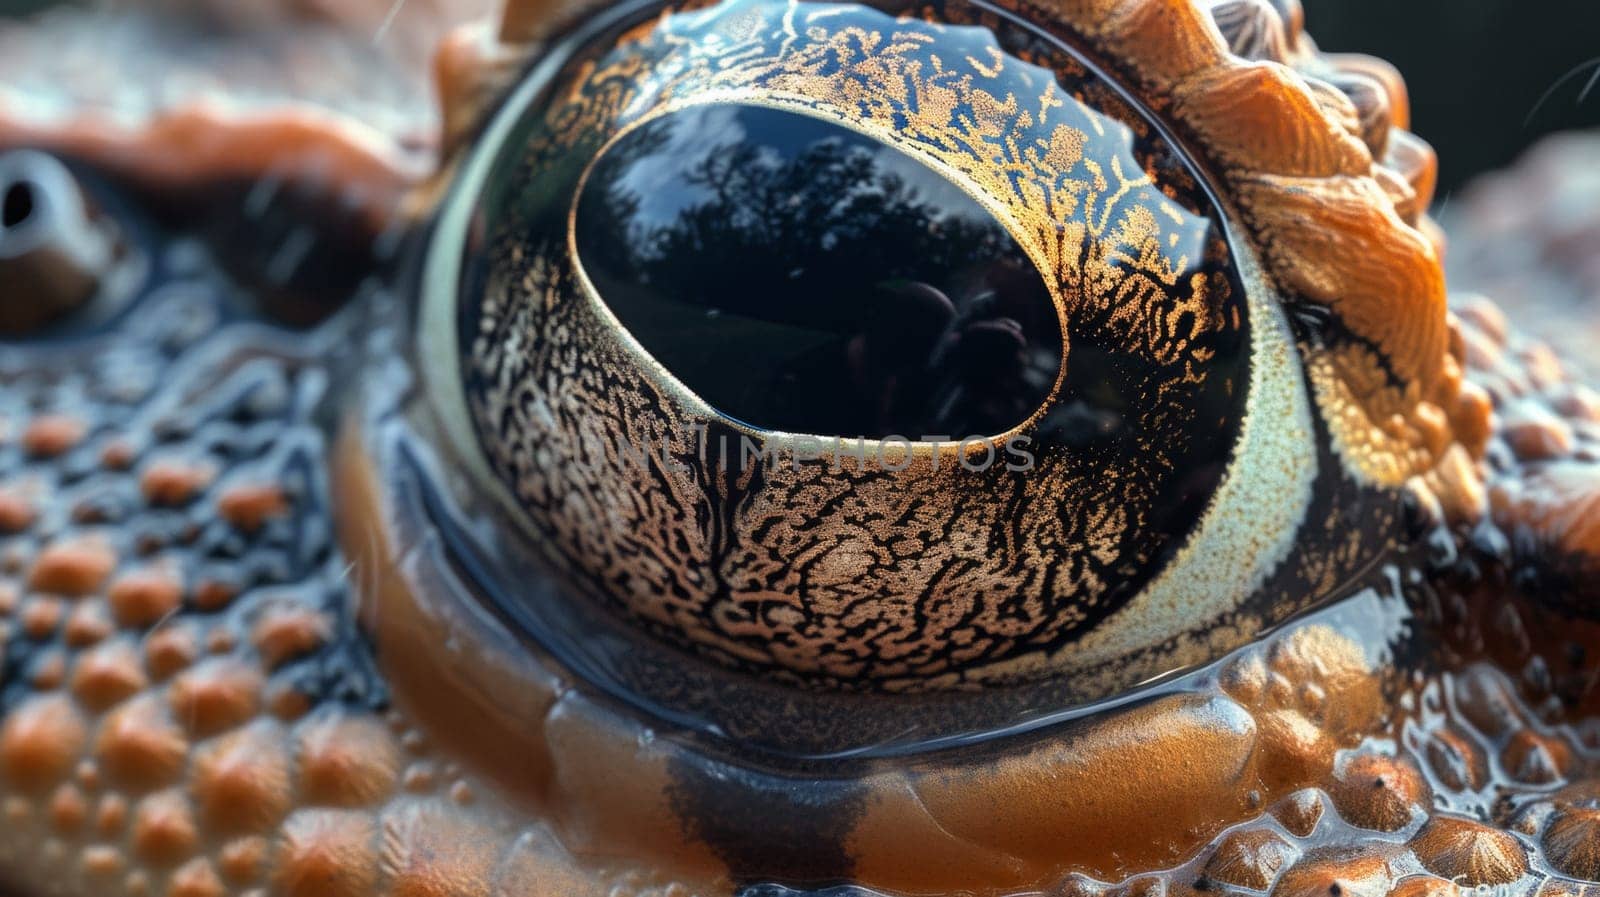 A close up of a large eye on an alligator